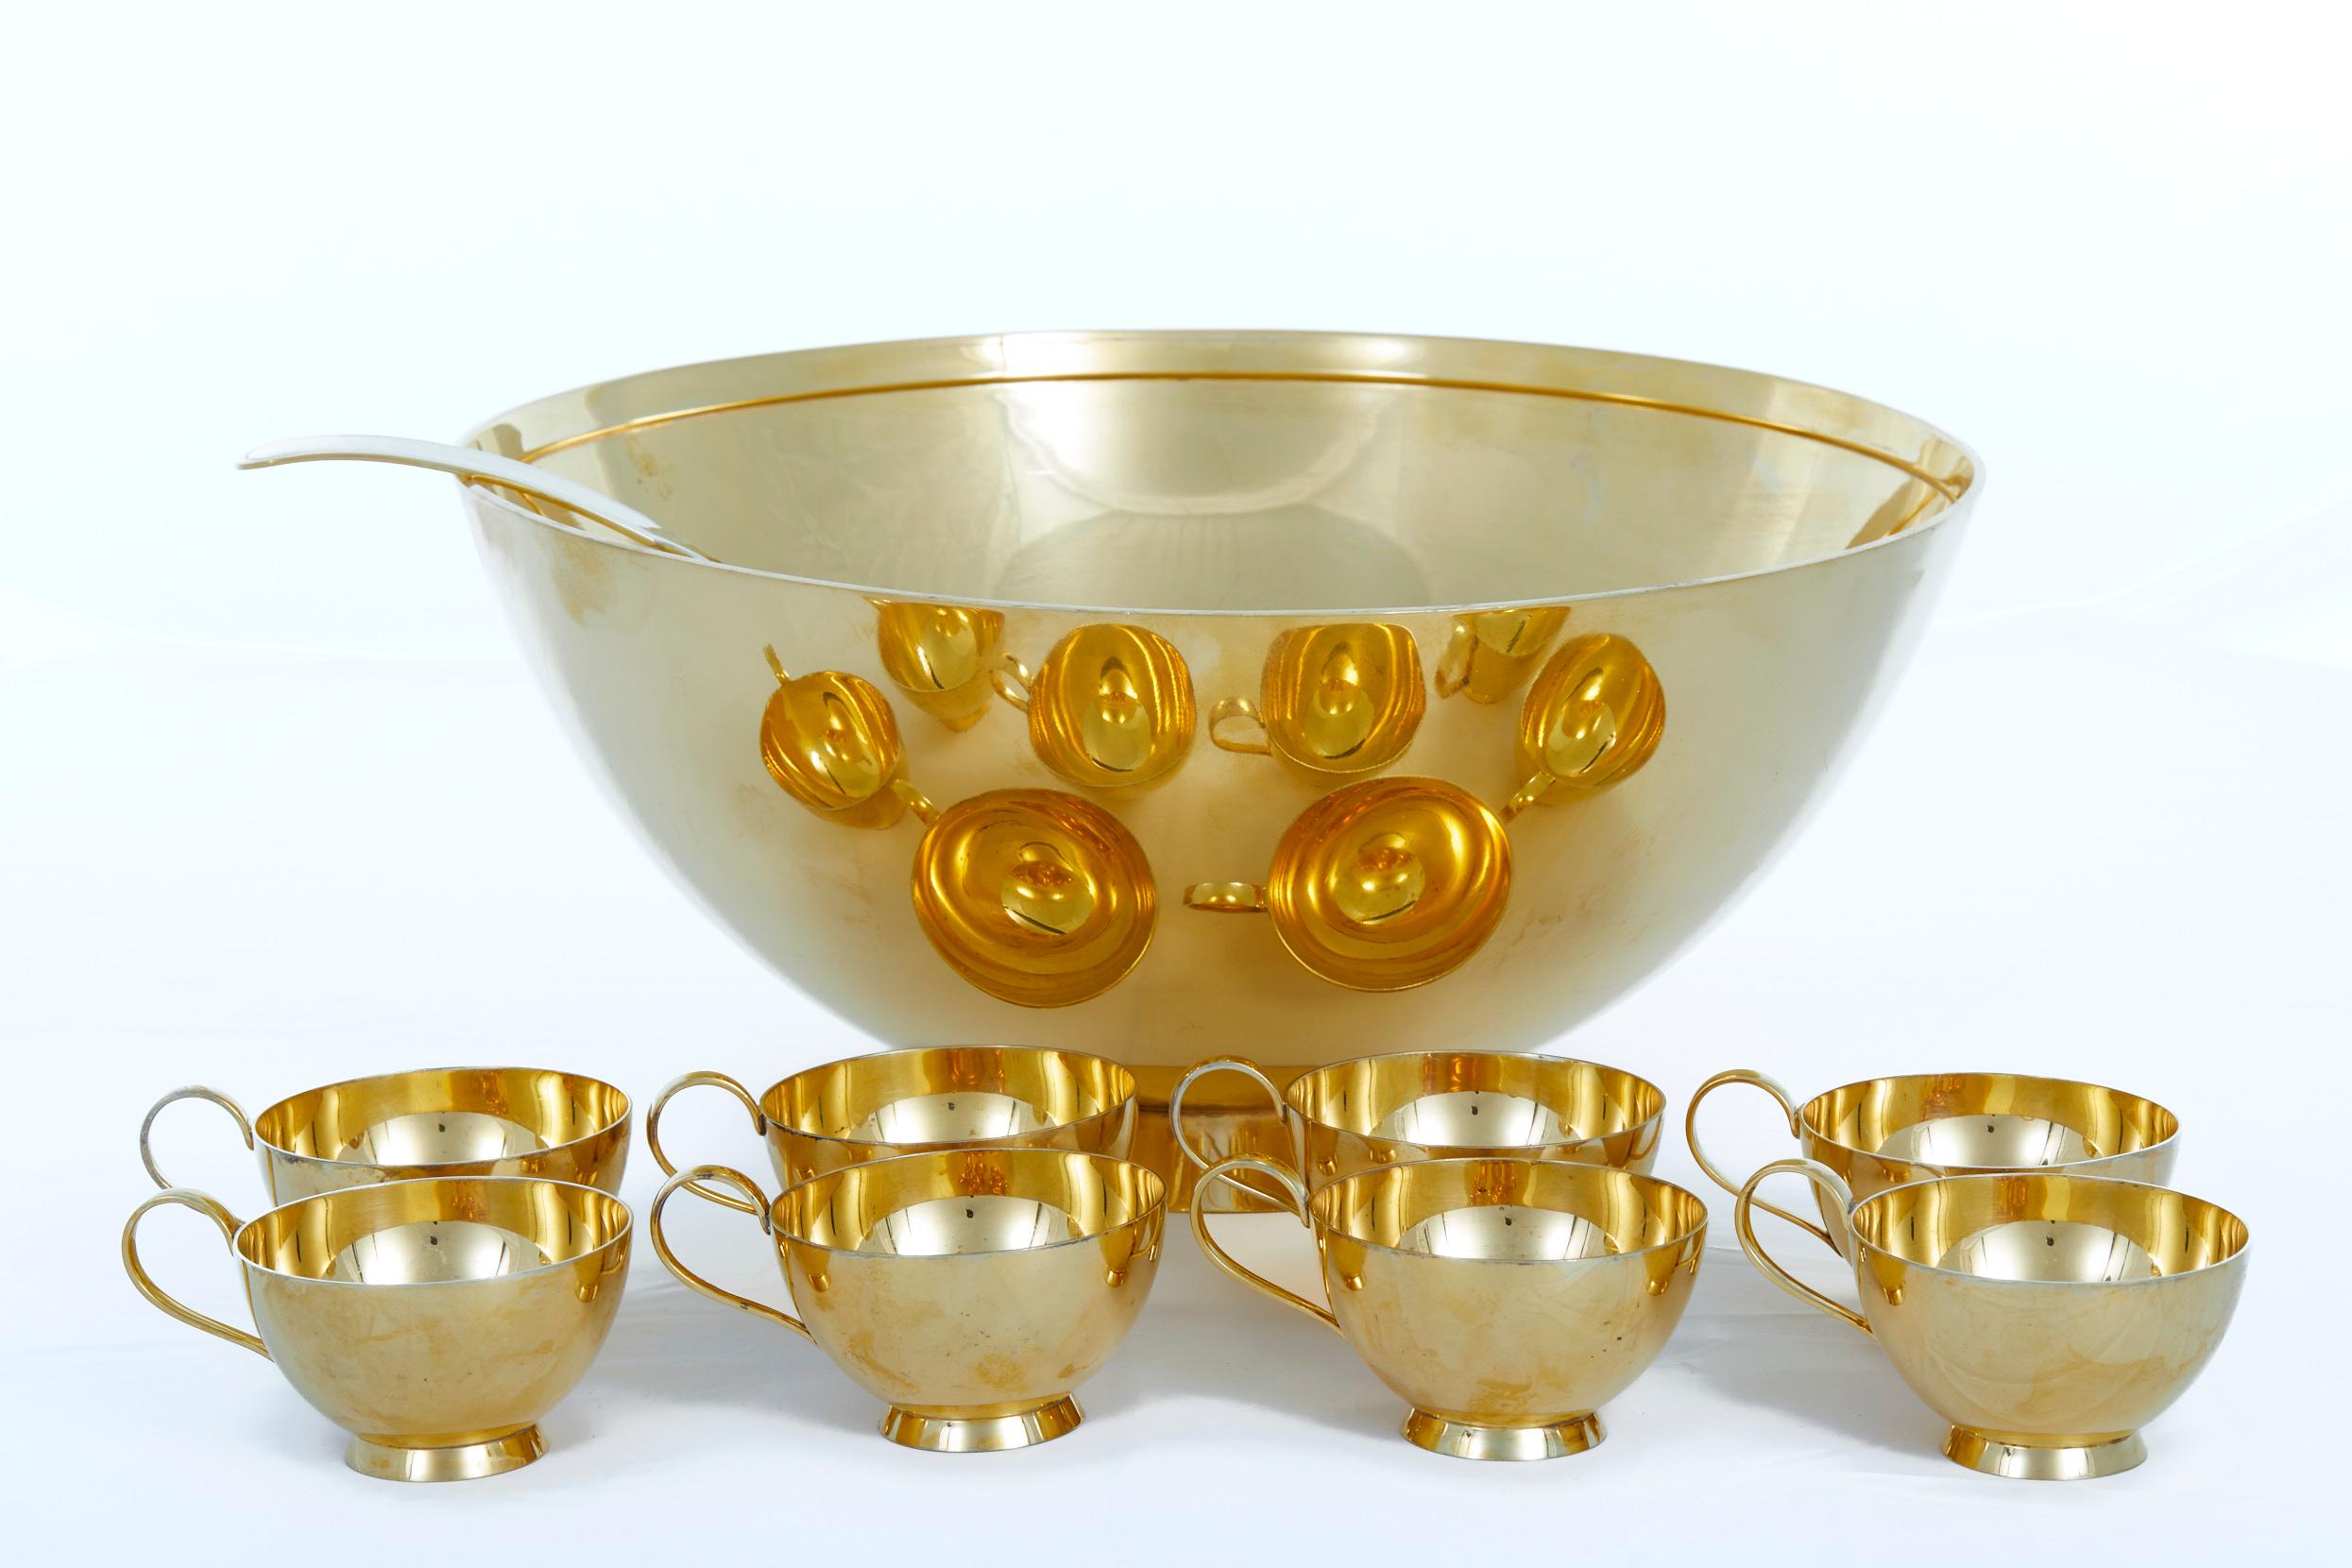 Tiffany & Co. sterling silver / gilt barware / tableware art deco style punch bowl service for eight people . The set include 10 piece altogether. Eight drinking cup. One large punch bowl. One serving ladle. Each piece is in great condition. Minor